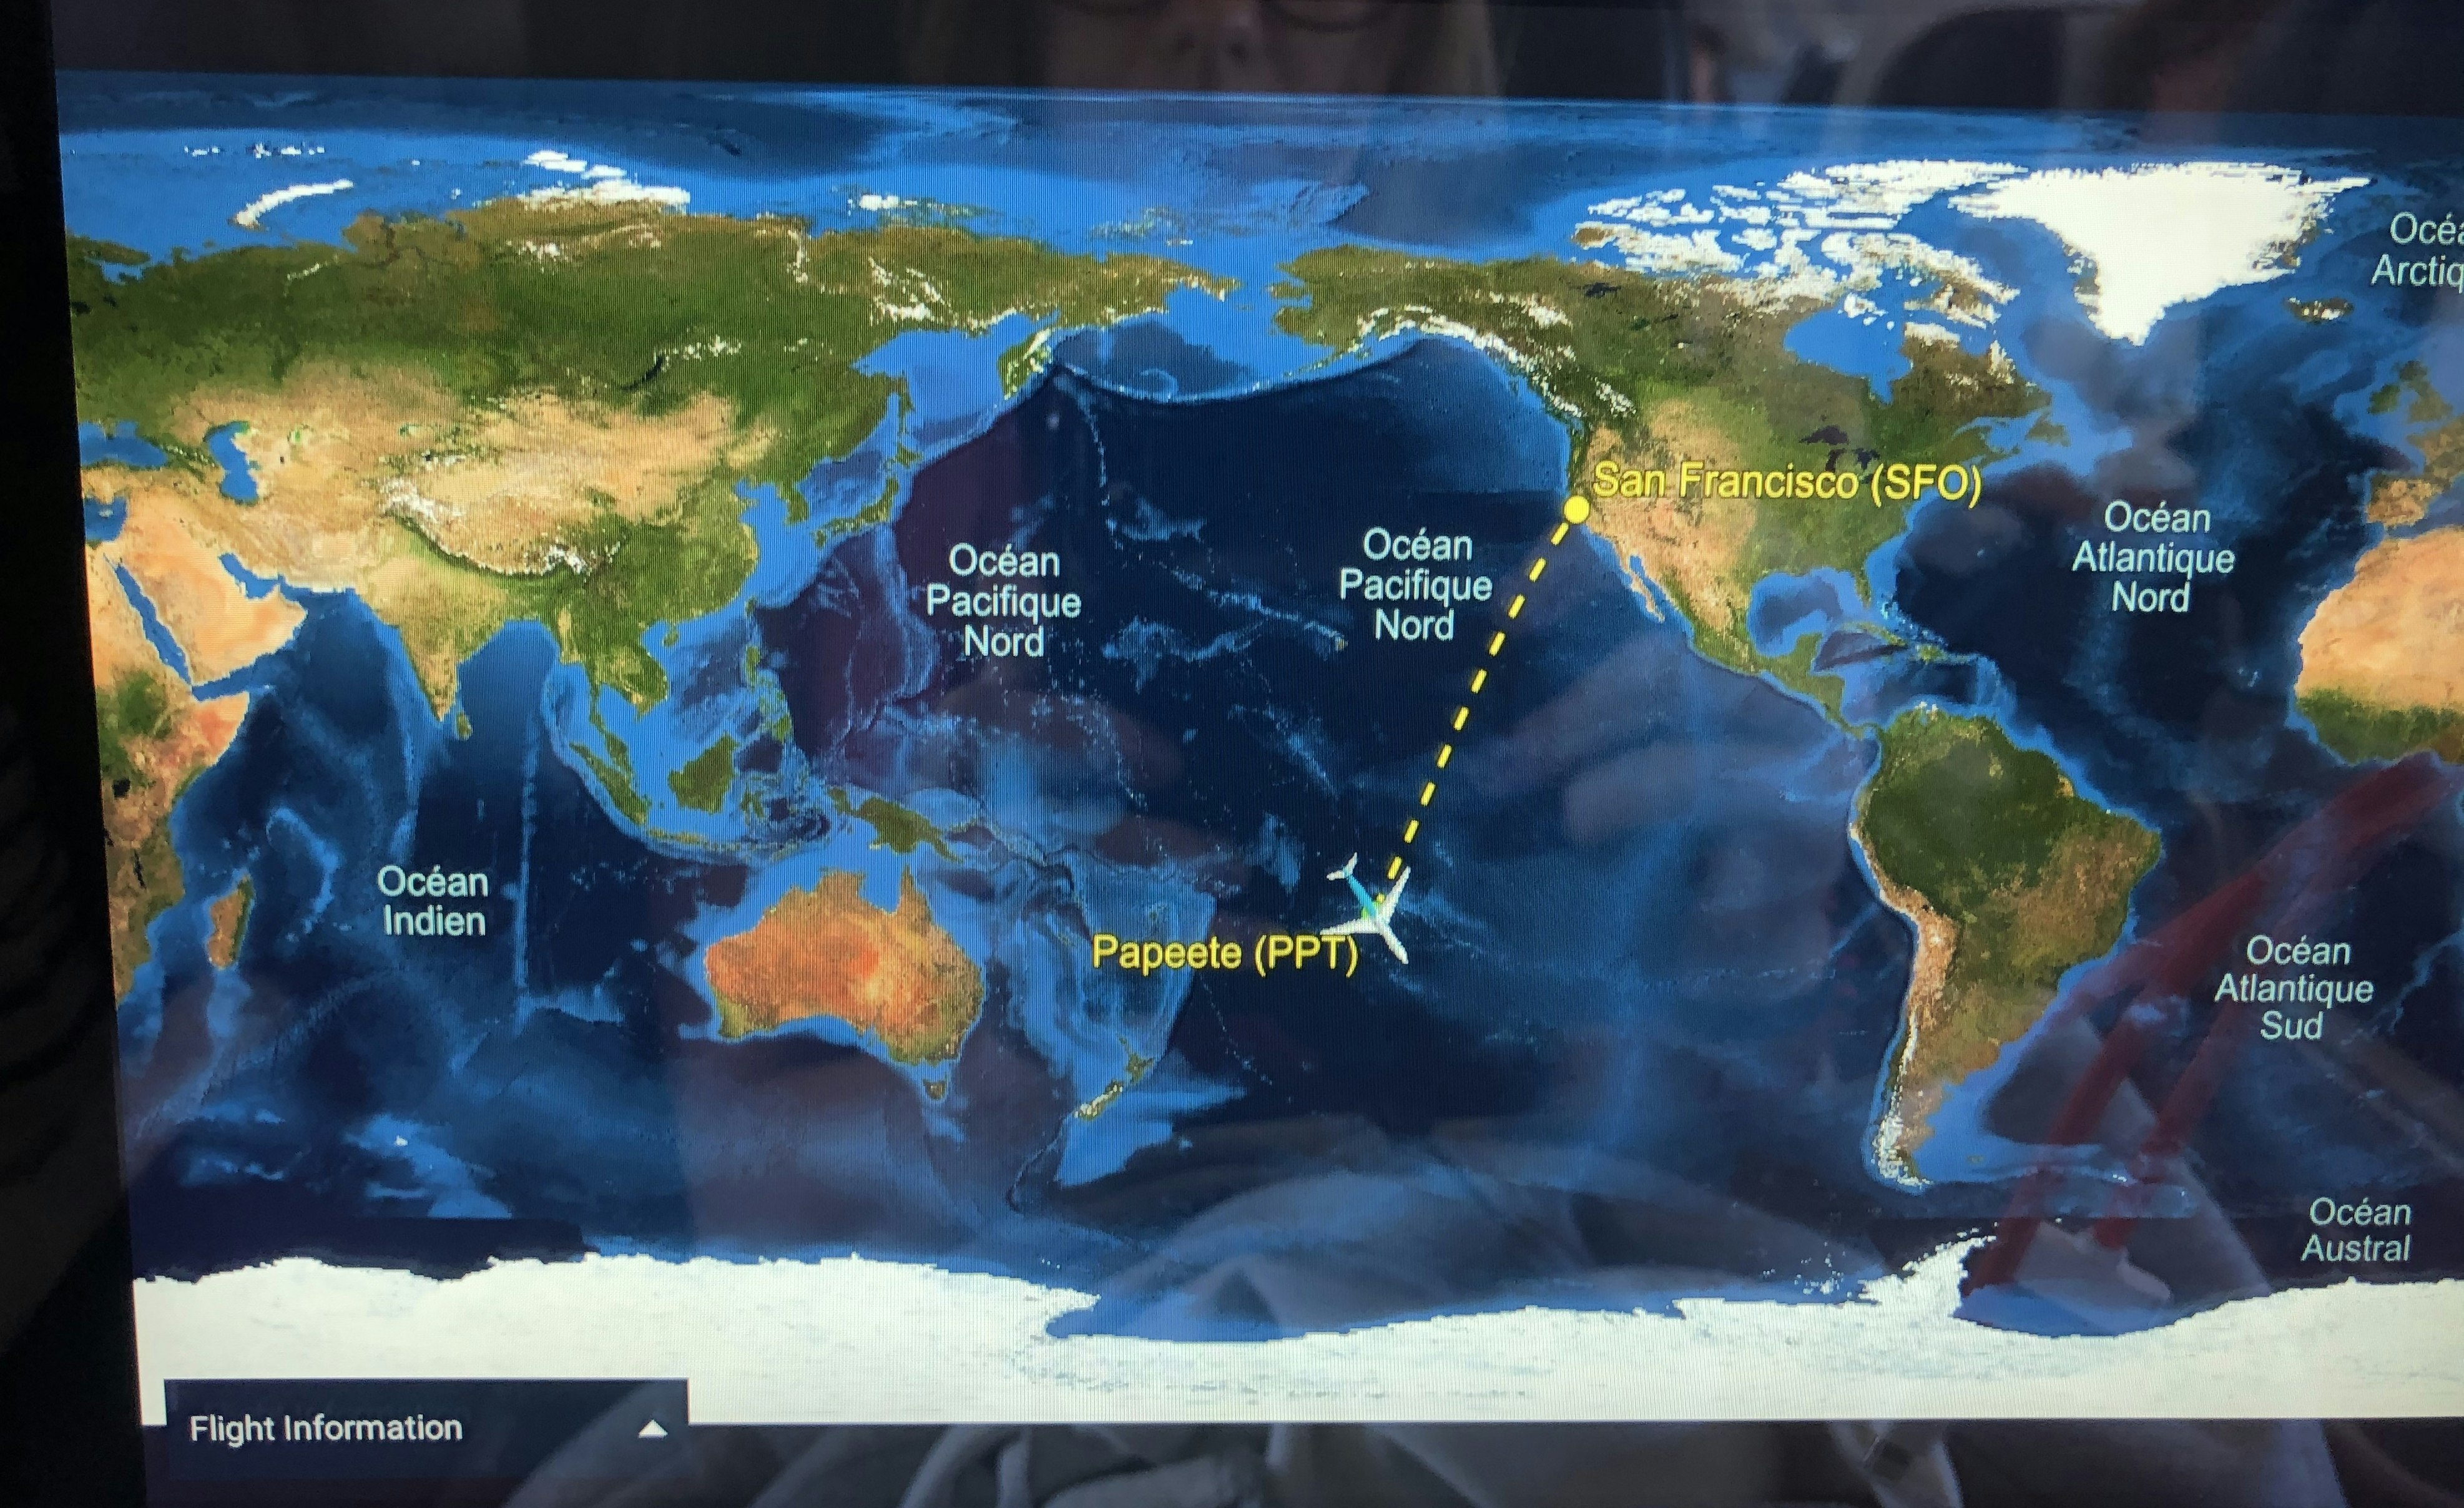 The inflight entertainment system displaying the flight map